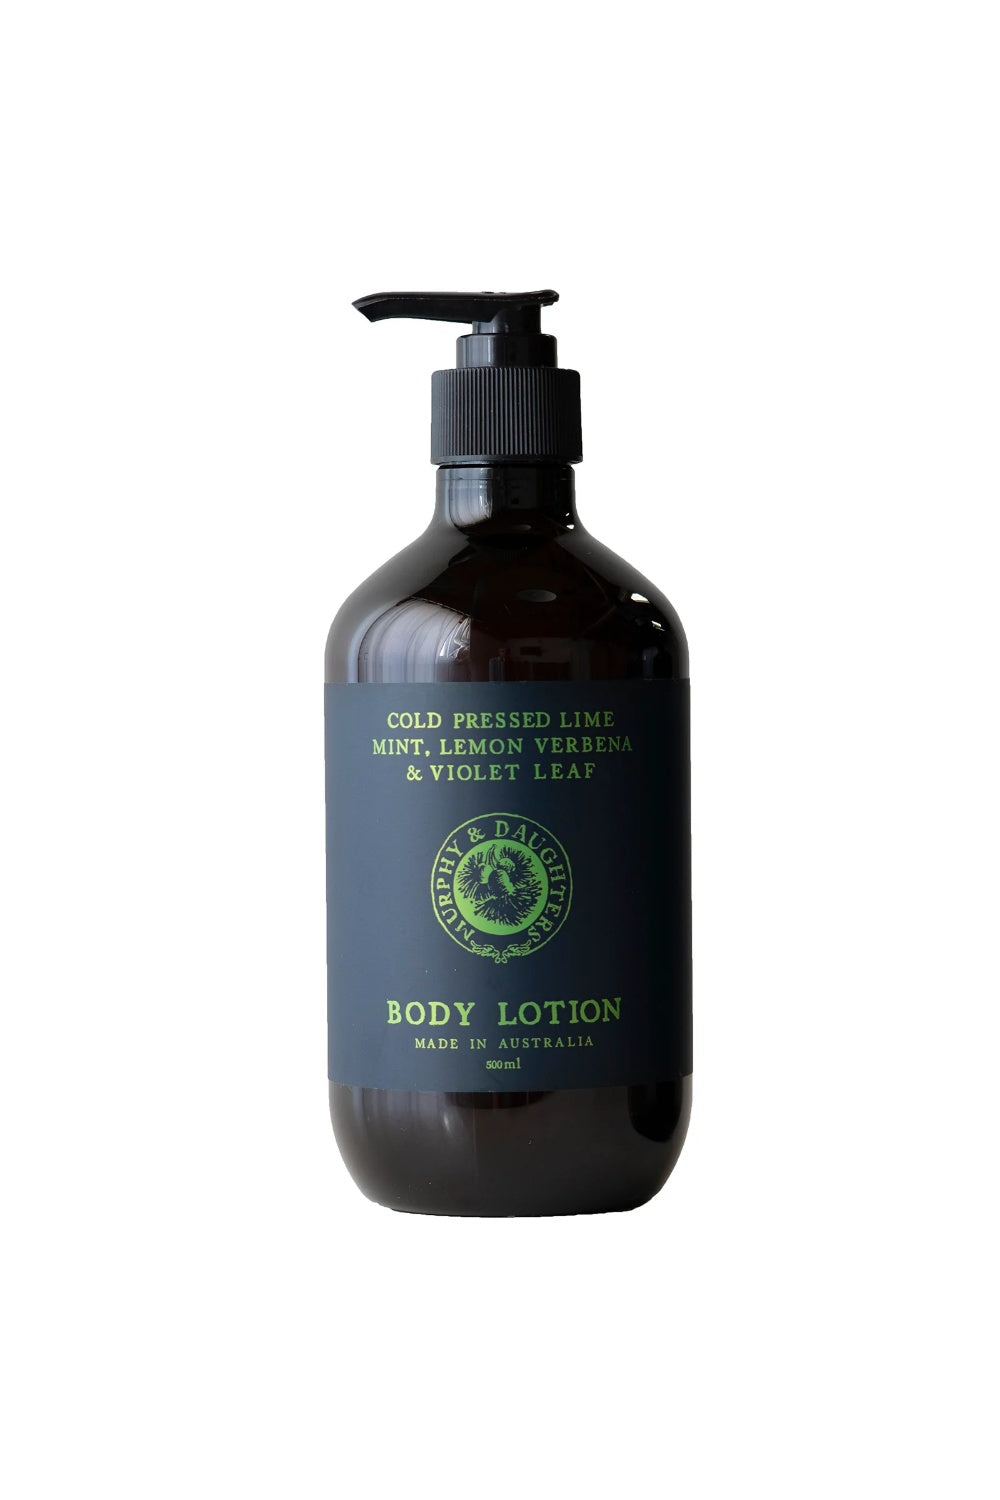 MURPHY & DAUGHTERS HAND & BODY LOTION COLD PRESSED LIME, MINT, LEMON, VERBENA & VIOLET LEAVES